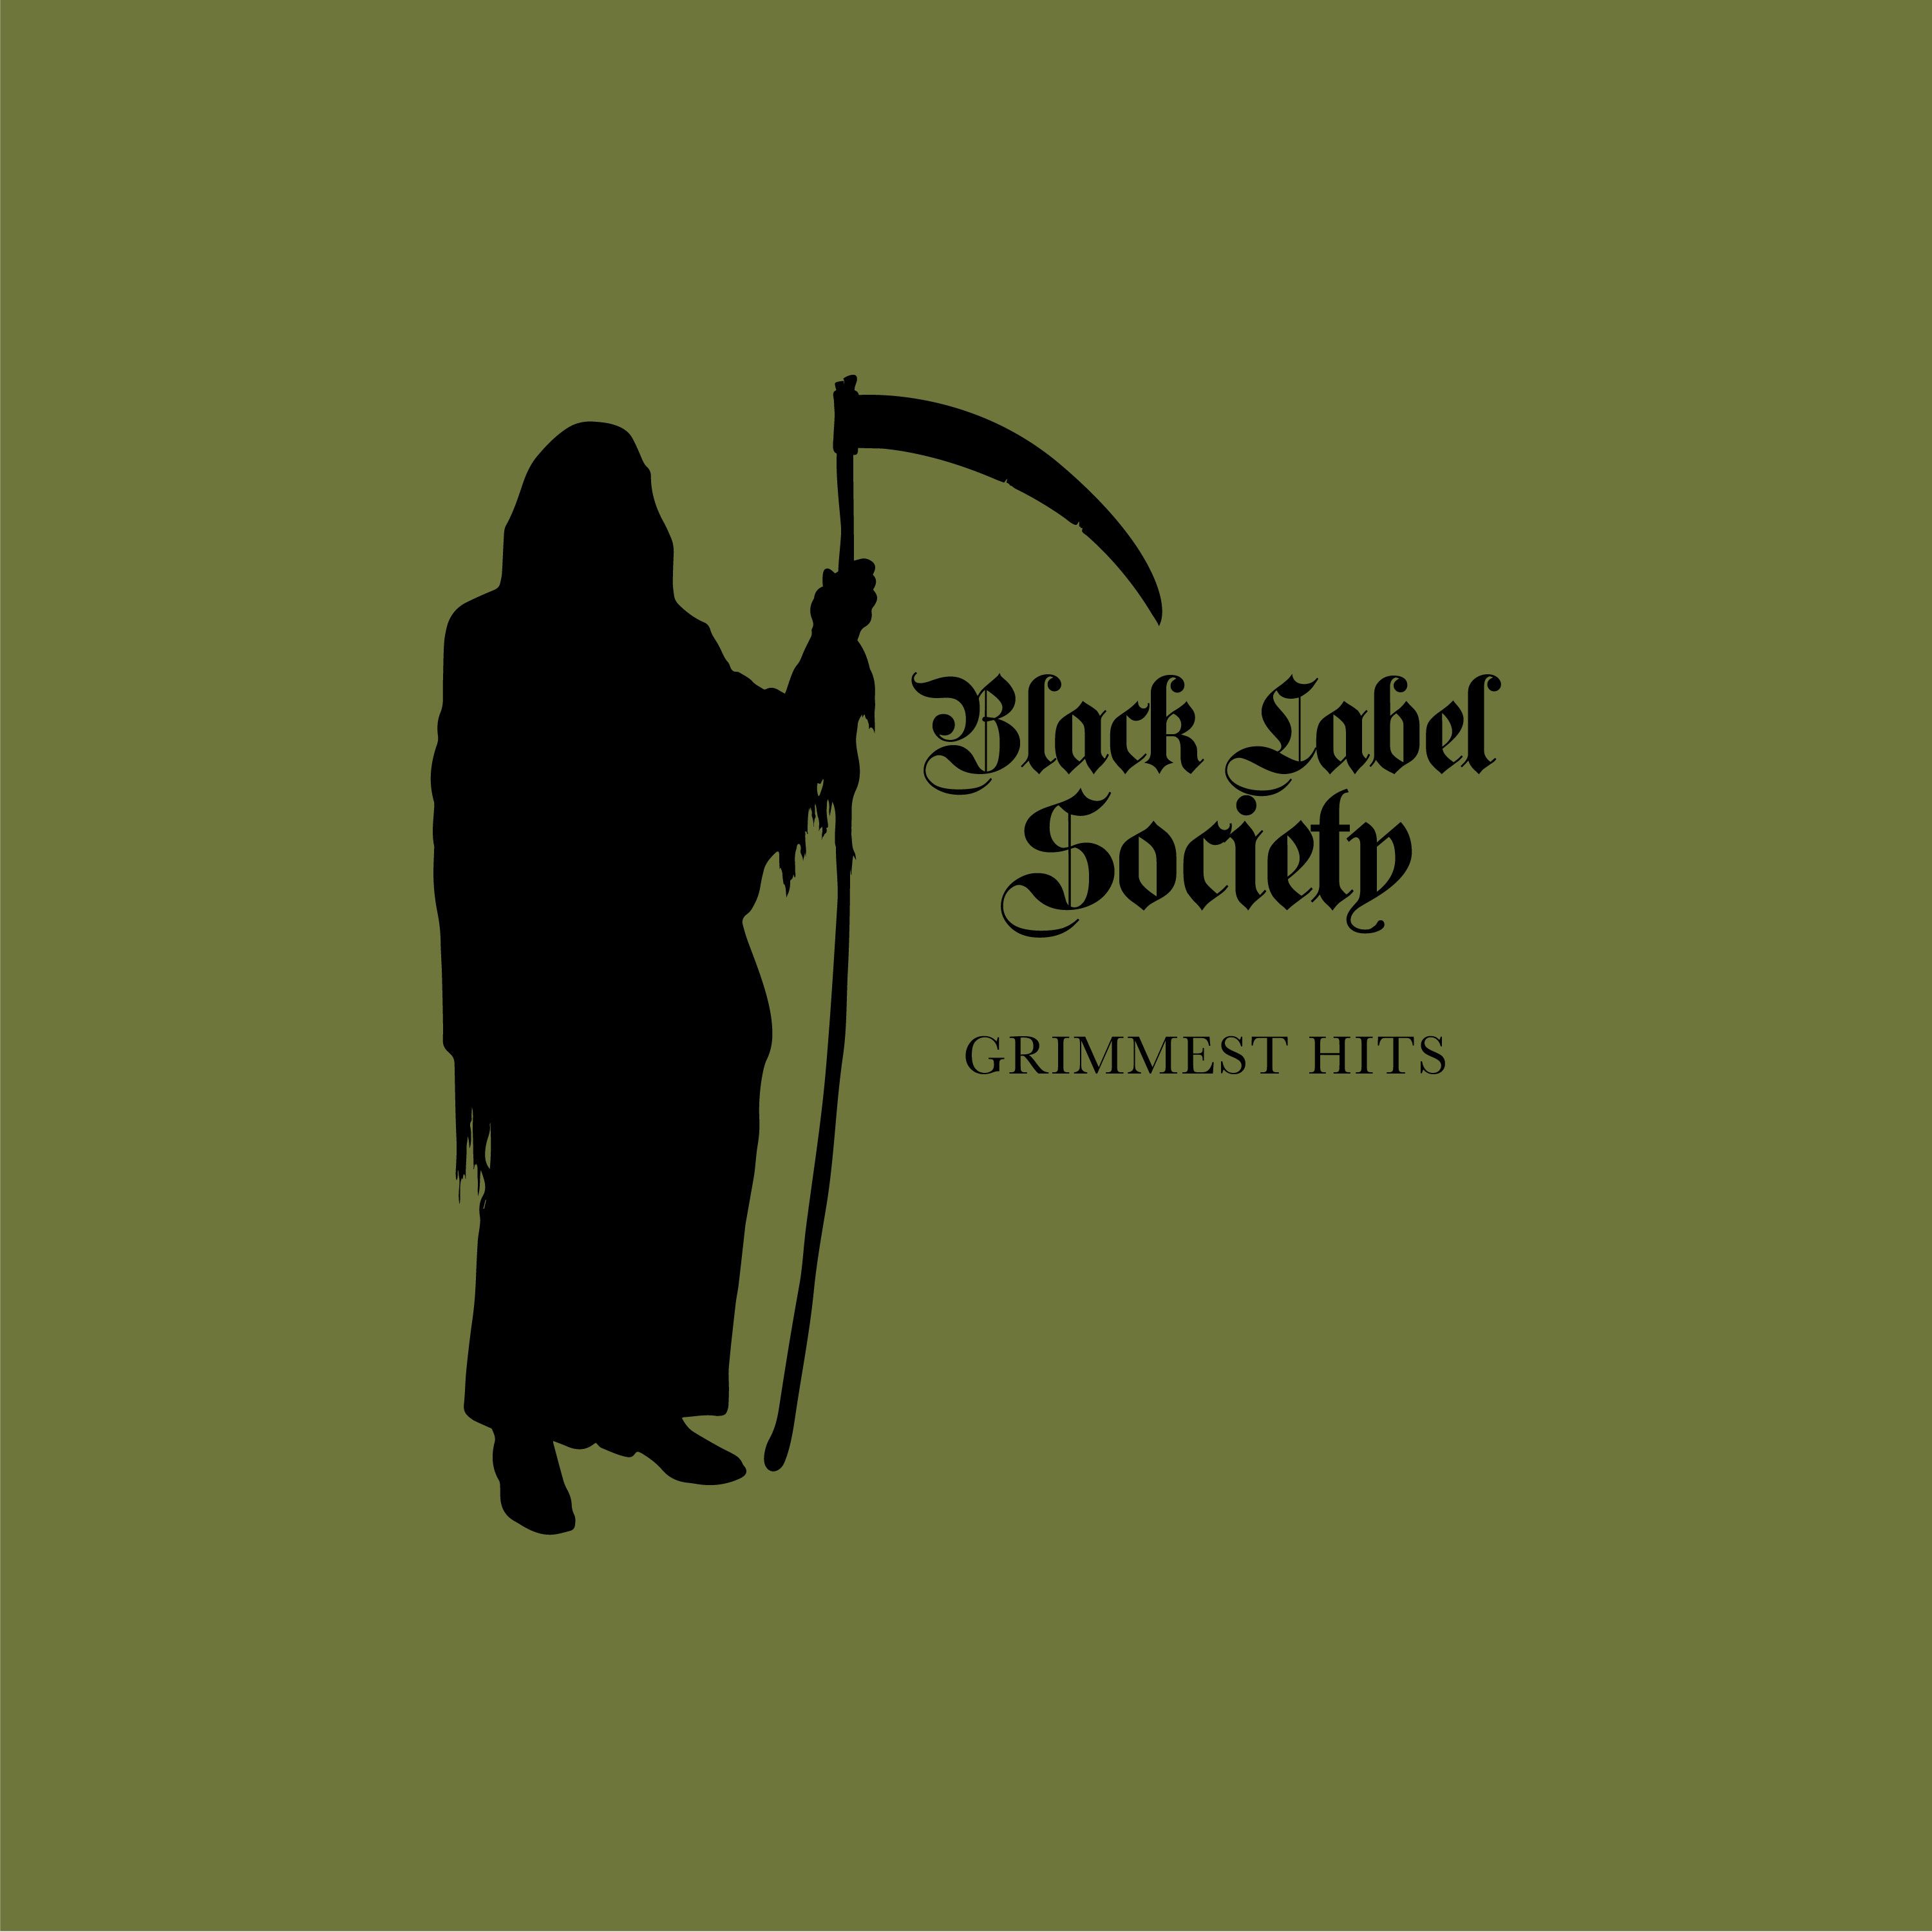 BLACK LABEL SOCIETY “Grimmest Hits” Release Janurary 19